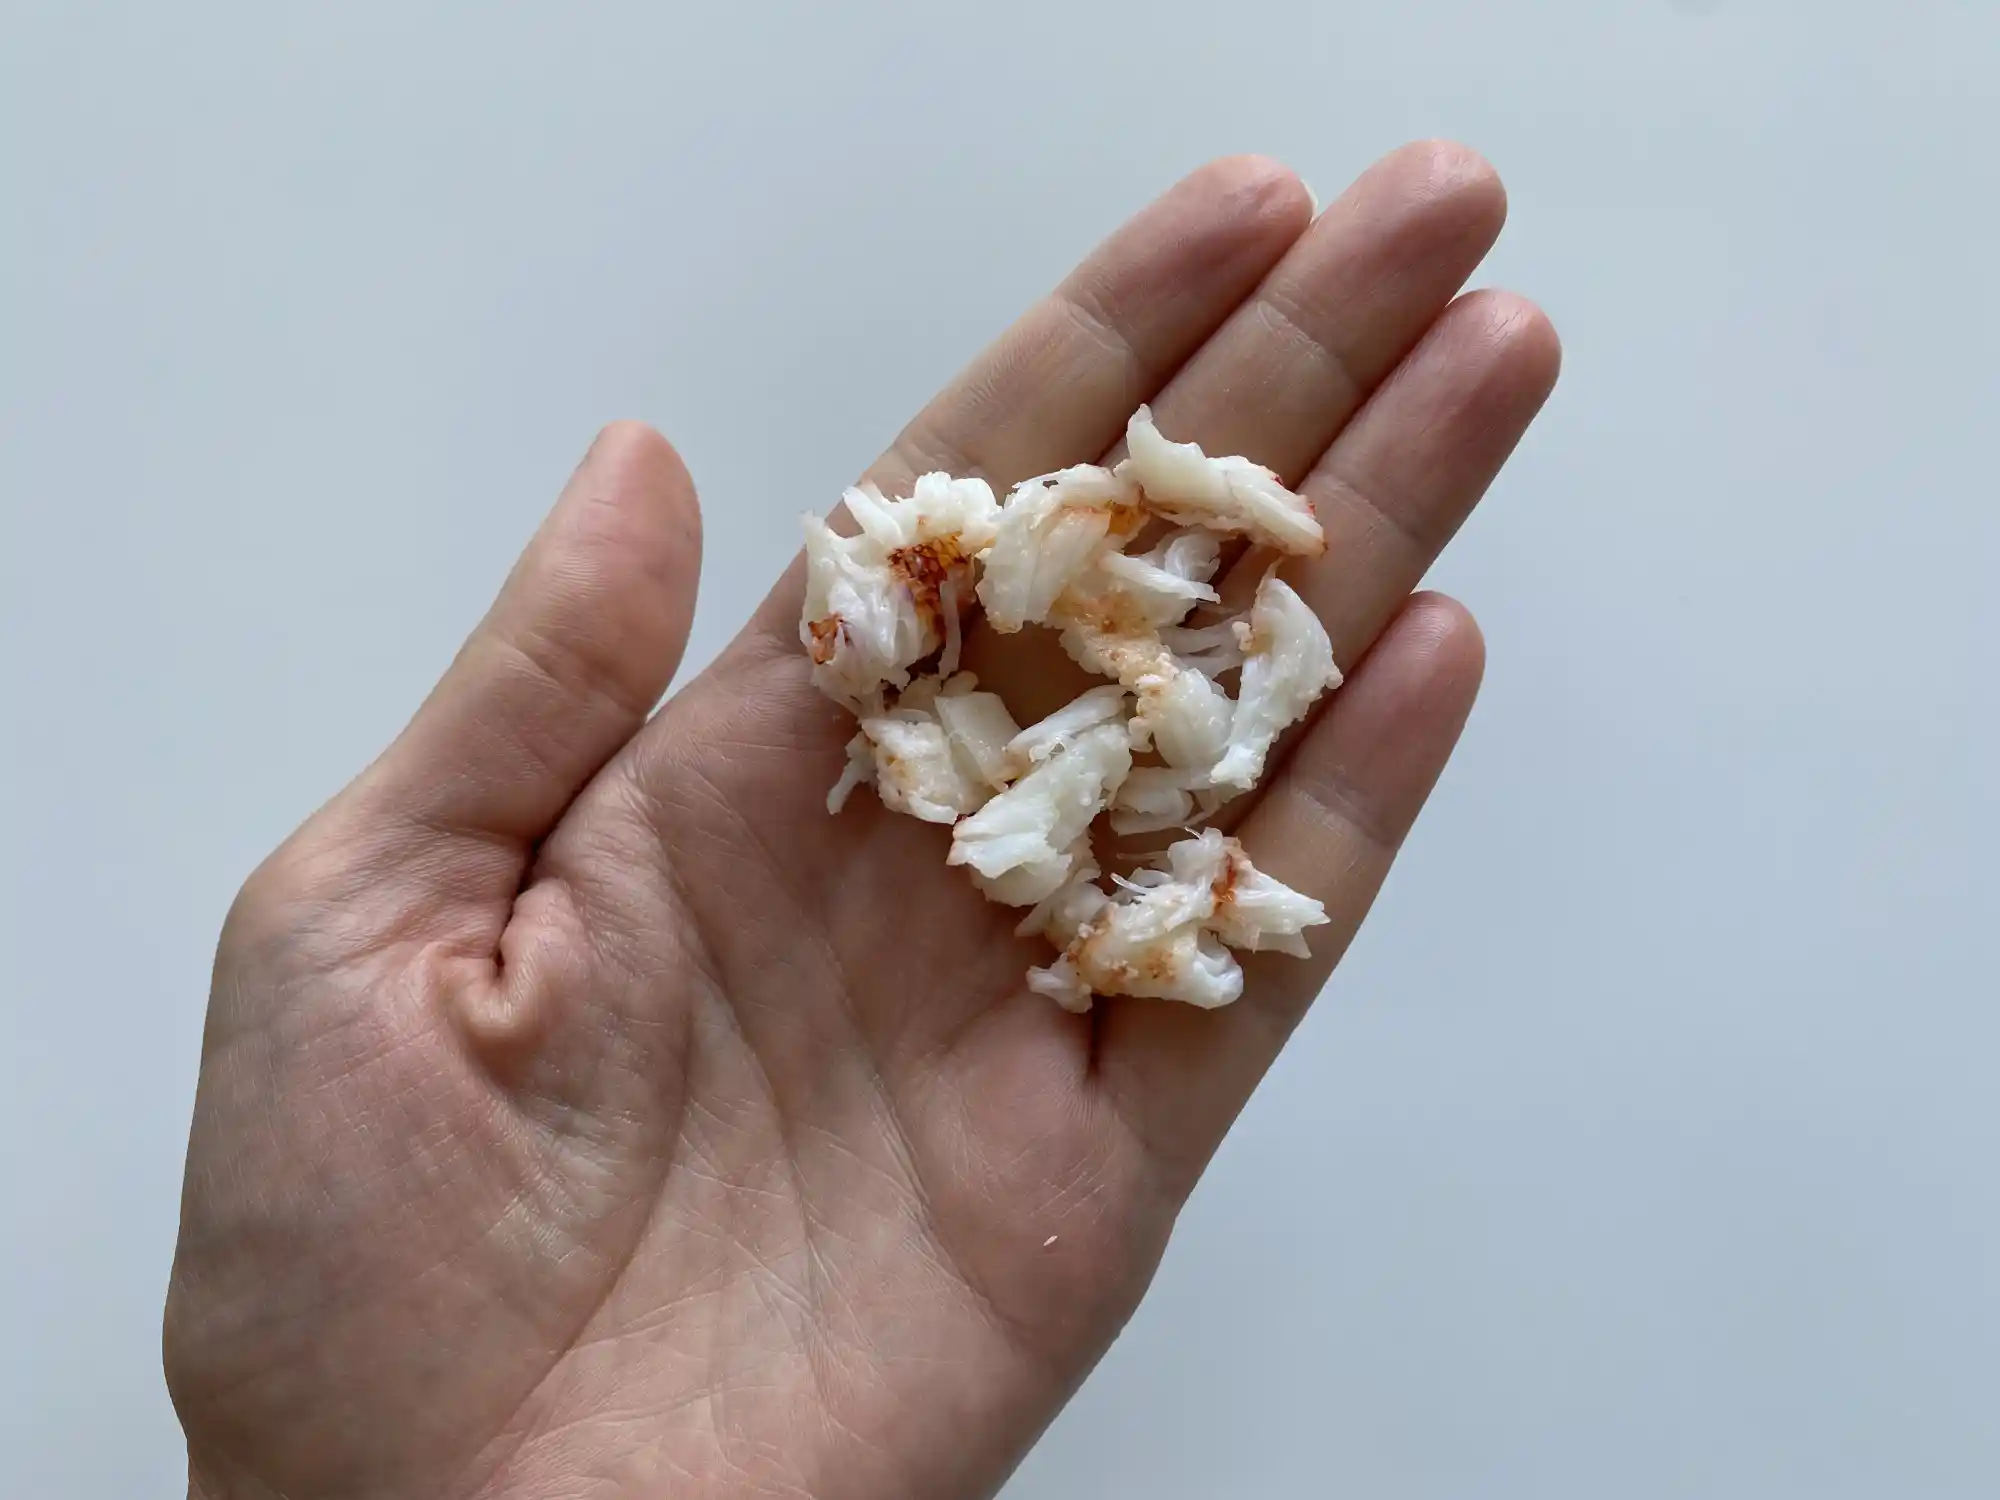 a hand holding a small pile of shredded pieces of lobster meat